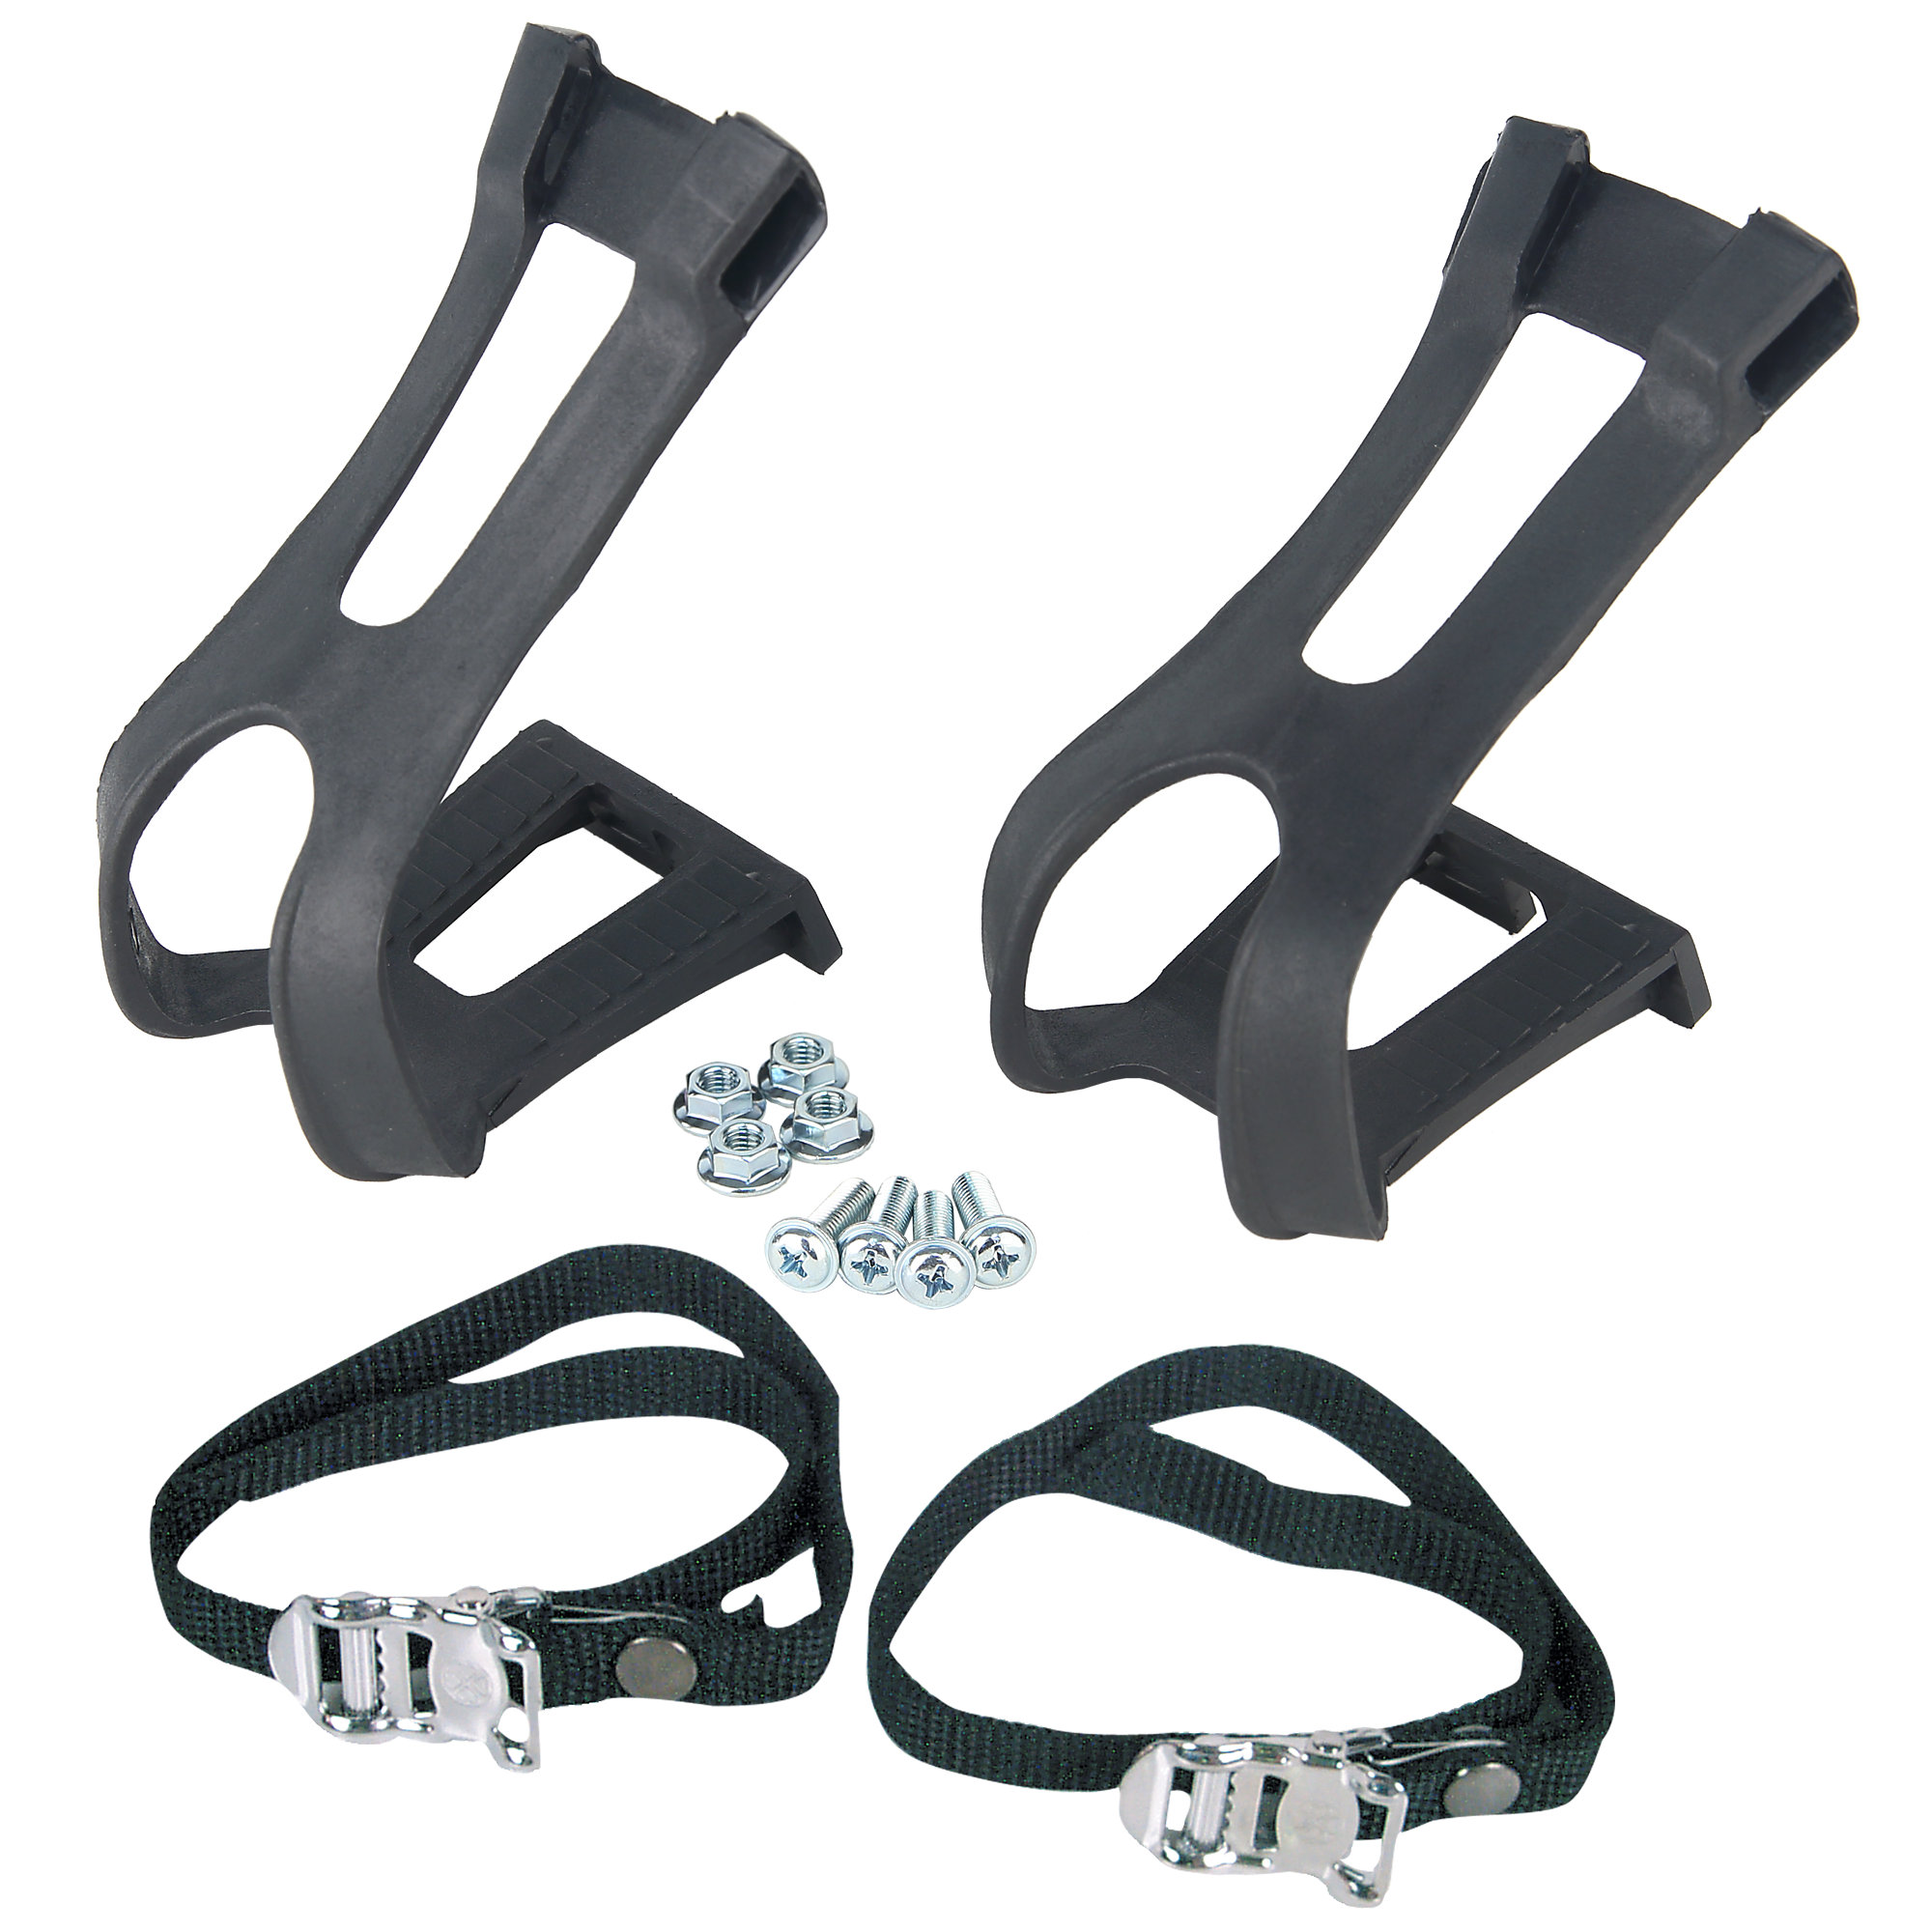 Toe Cage and Straps for Bike Pedals, Pair